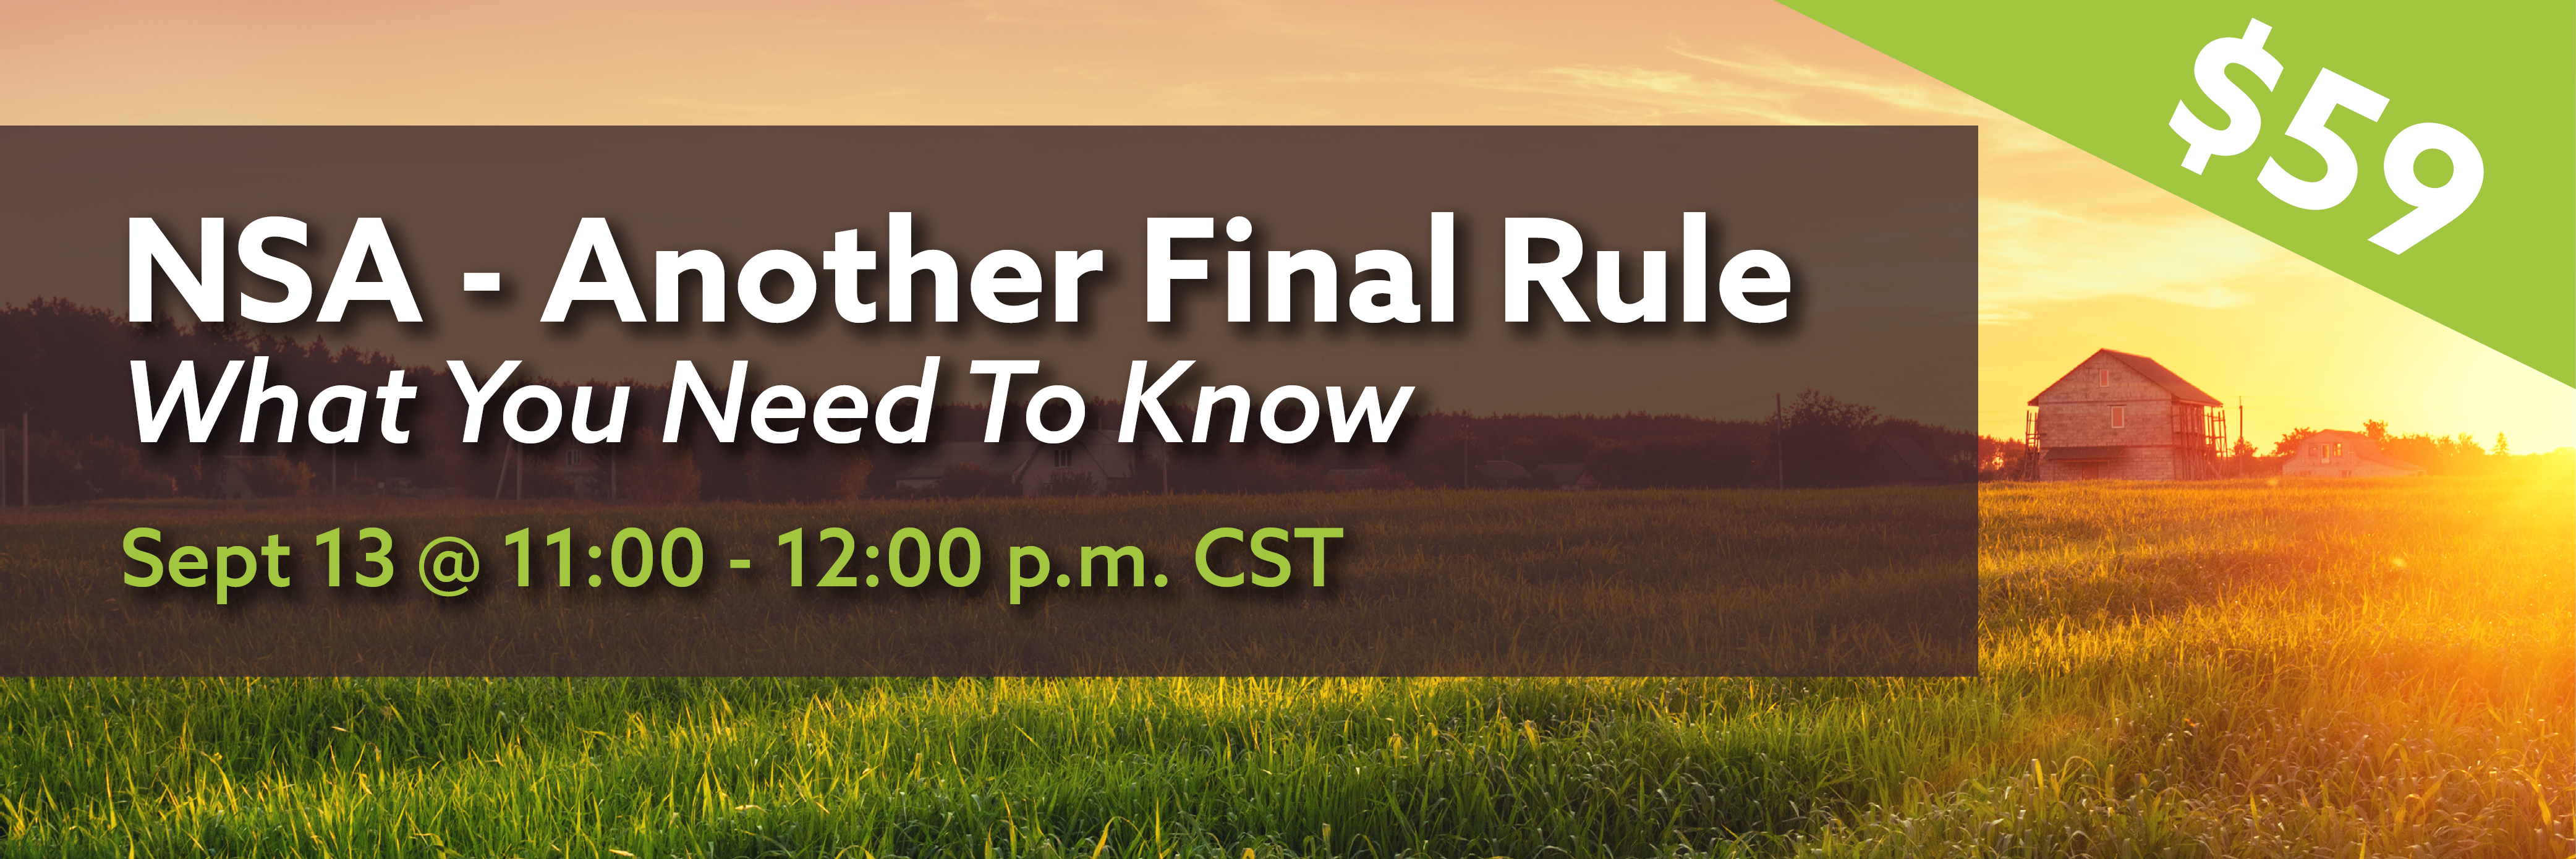 NSA - Another Final Rule, What You Need To Know Sept 13 @ 11:00 - 12:00 p.m. CST